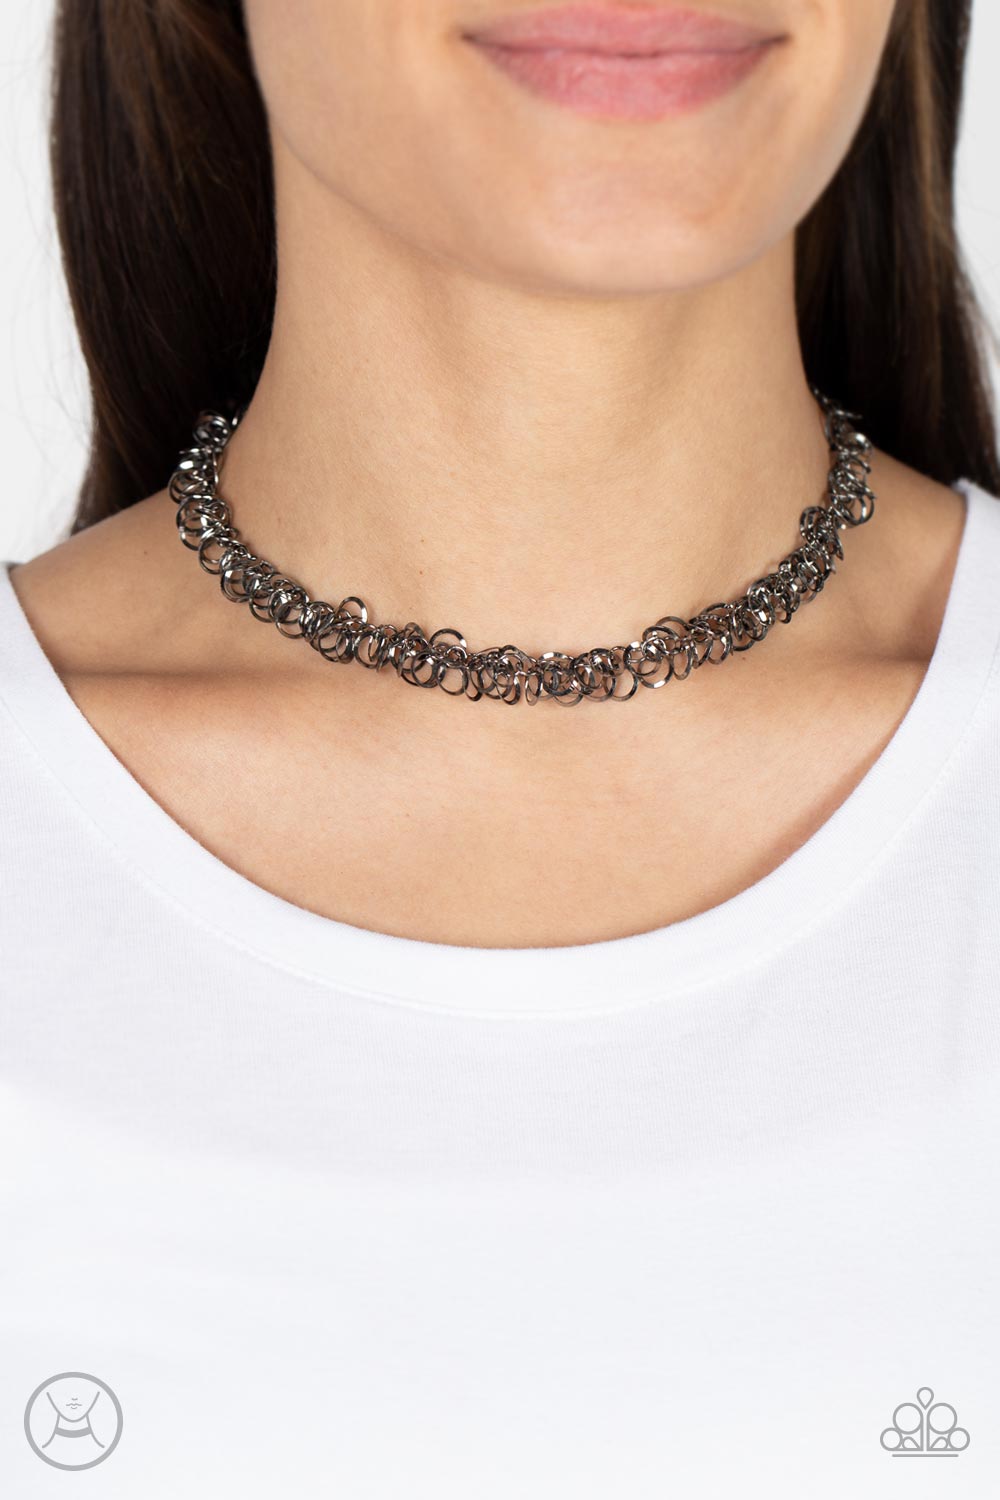 Cause a Commotion - Black Necklace - Paparazzi Accessories